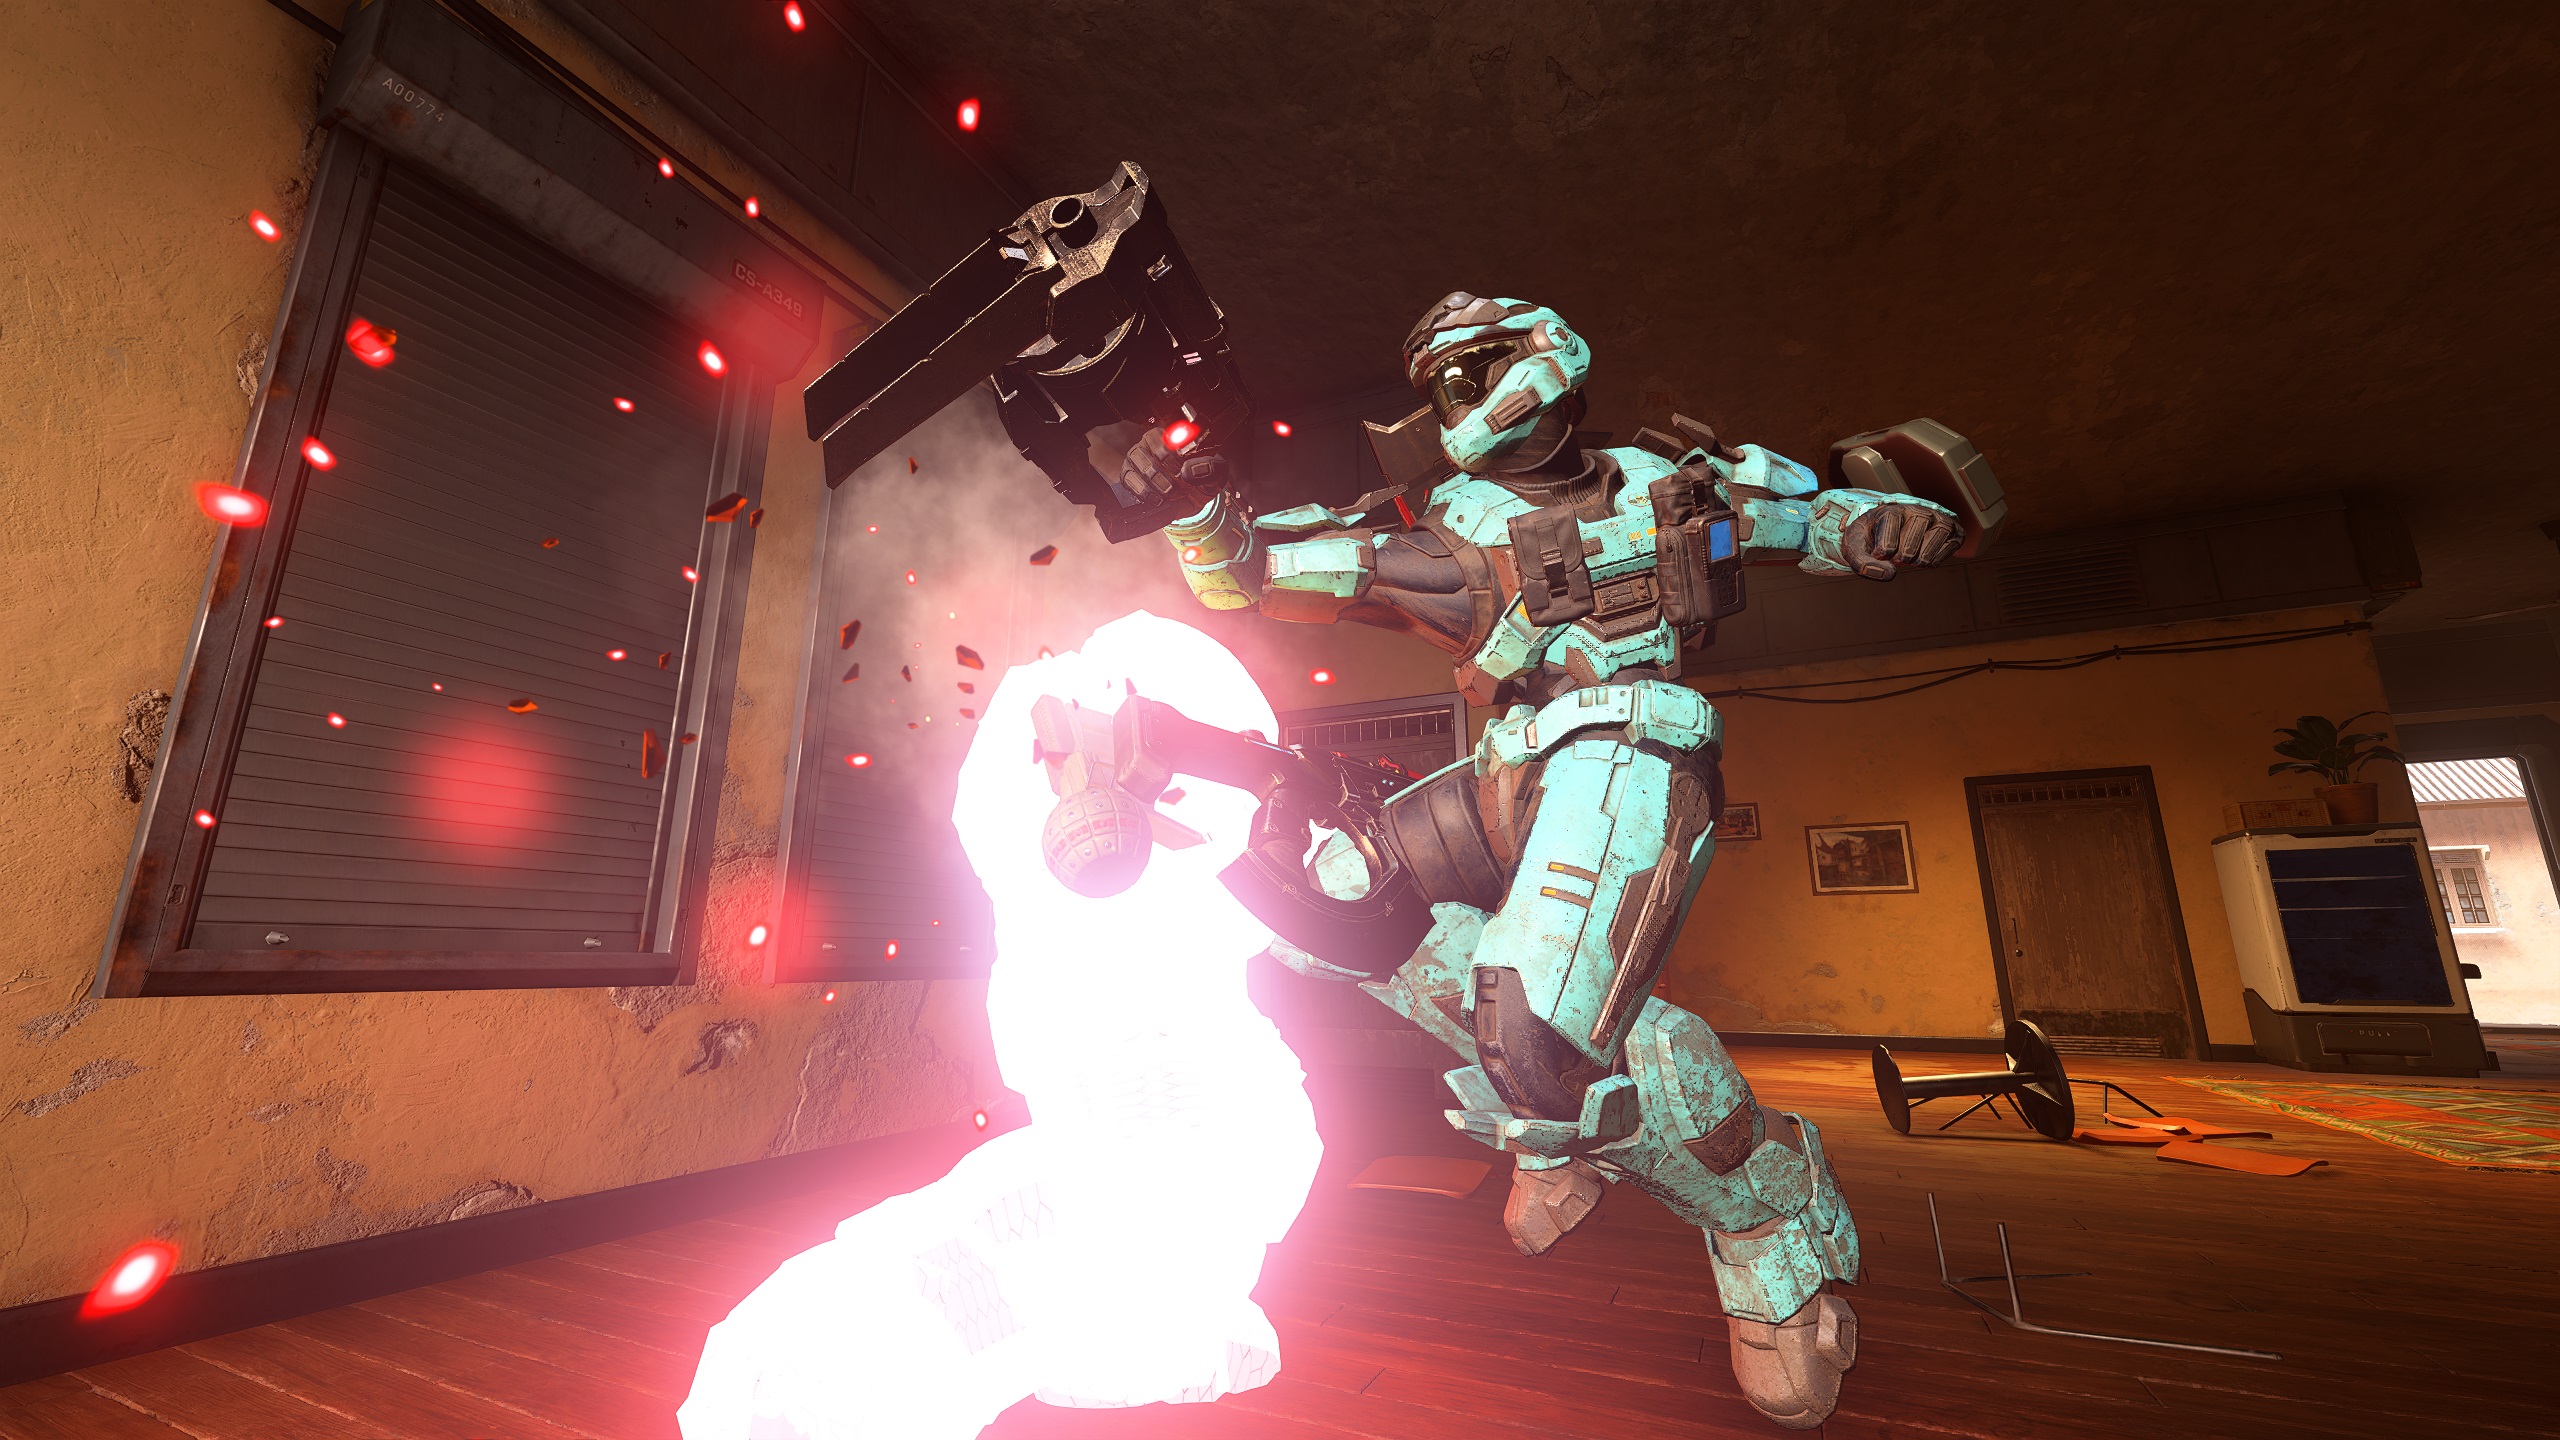 A teal halo soldier punches down a red glowing opponent